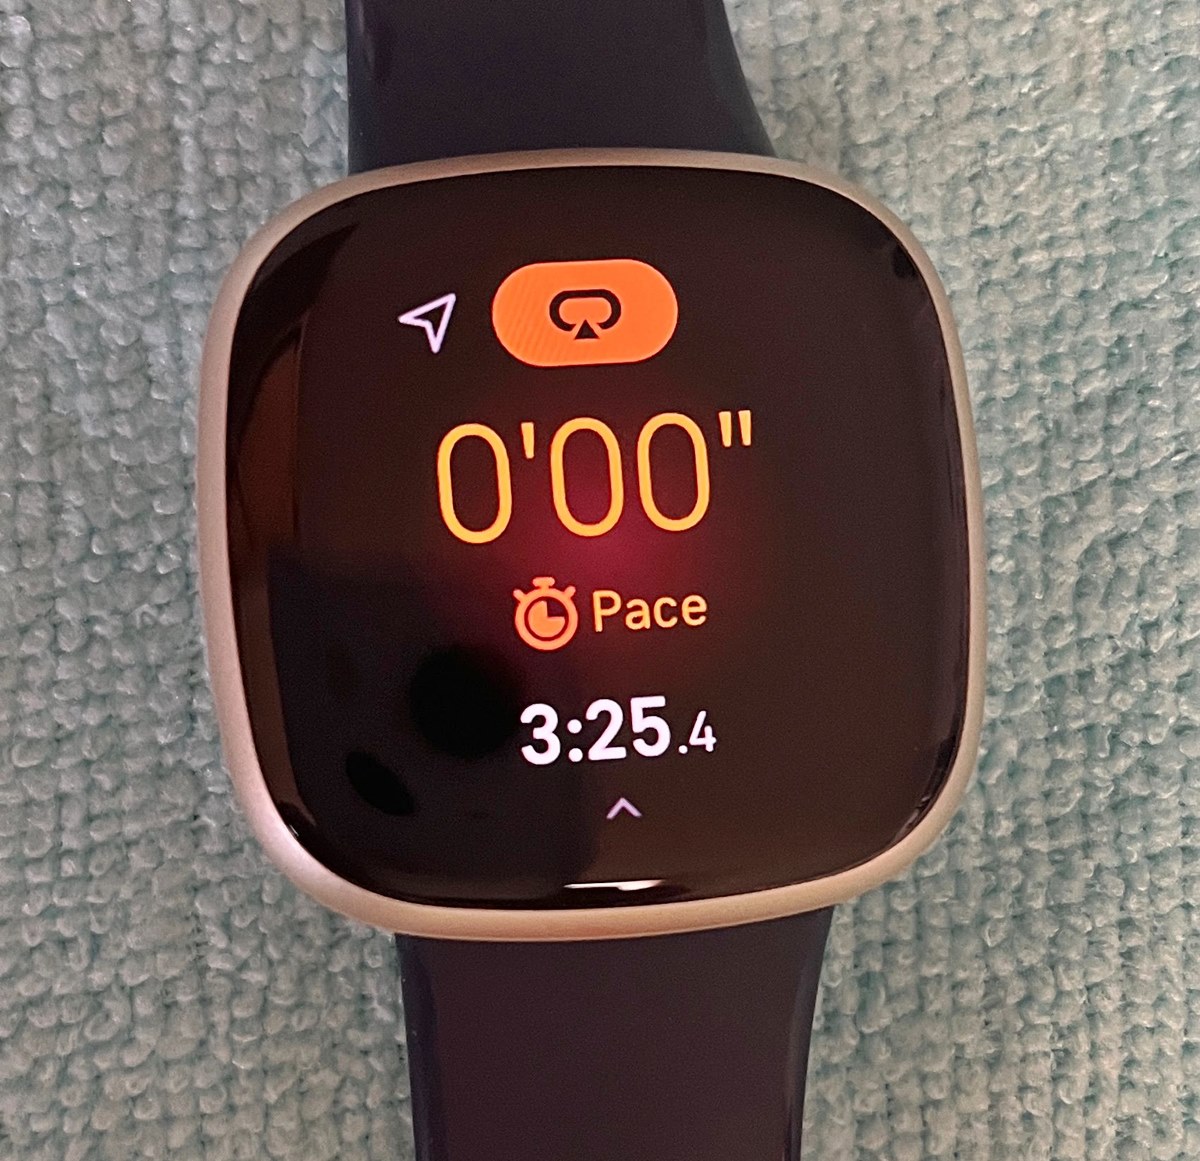 What Does Pace Mean On Fitbit